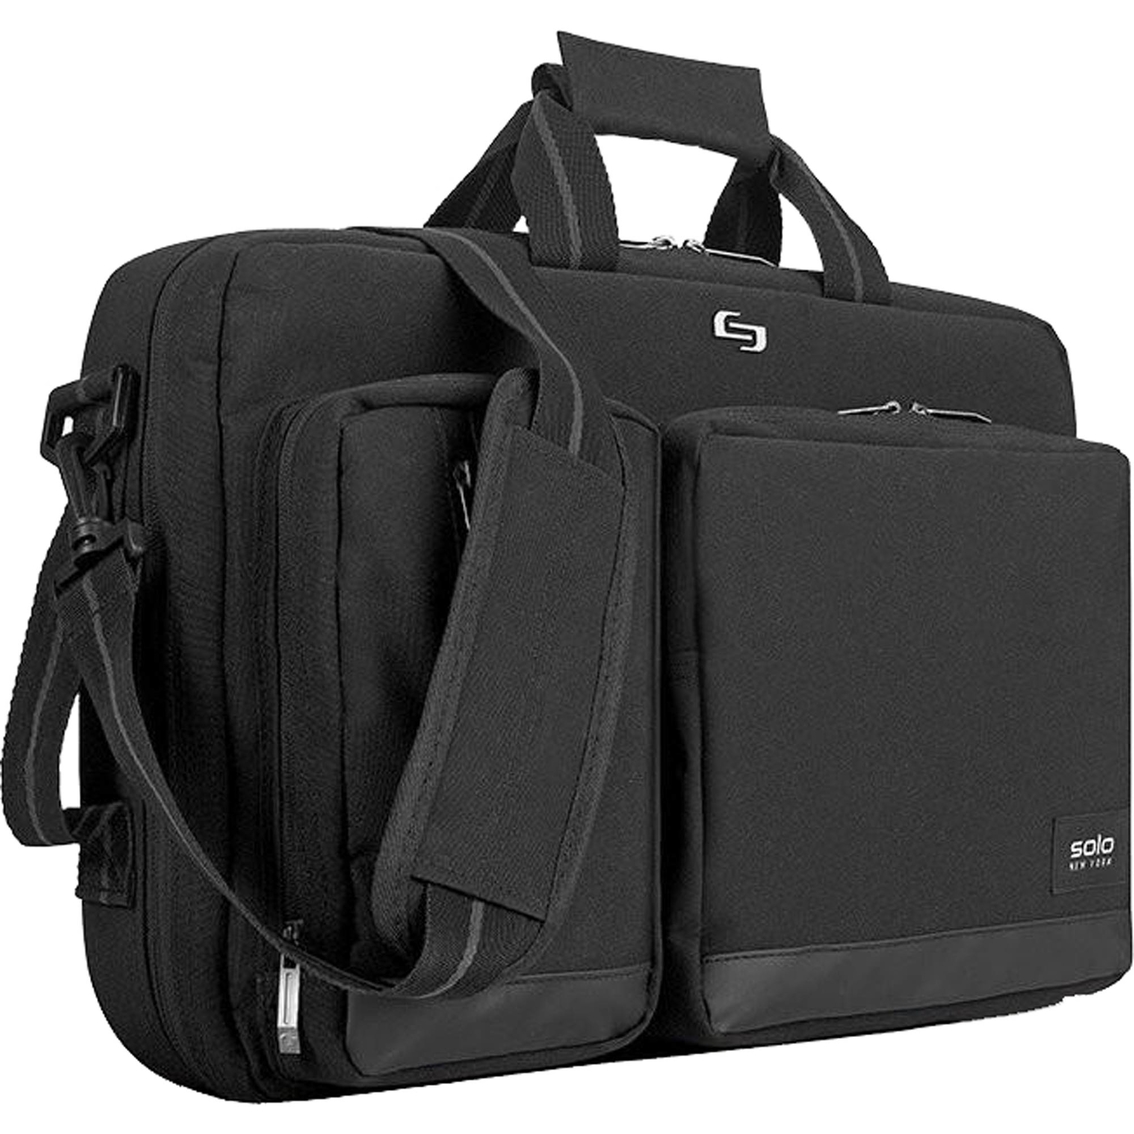 Solo Duane Hybrid 15.6 in. Briefcase - Image 4 of 6